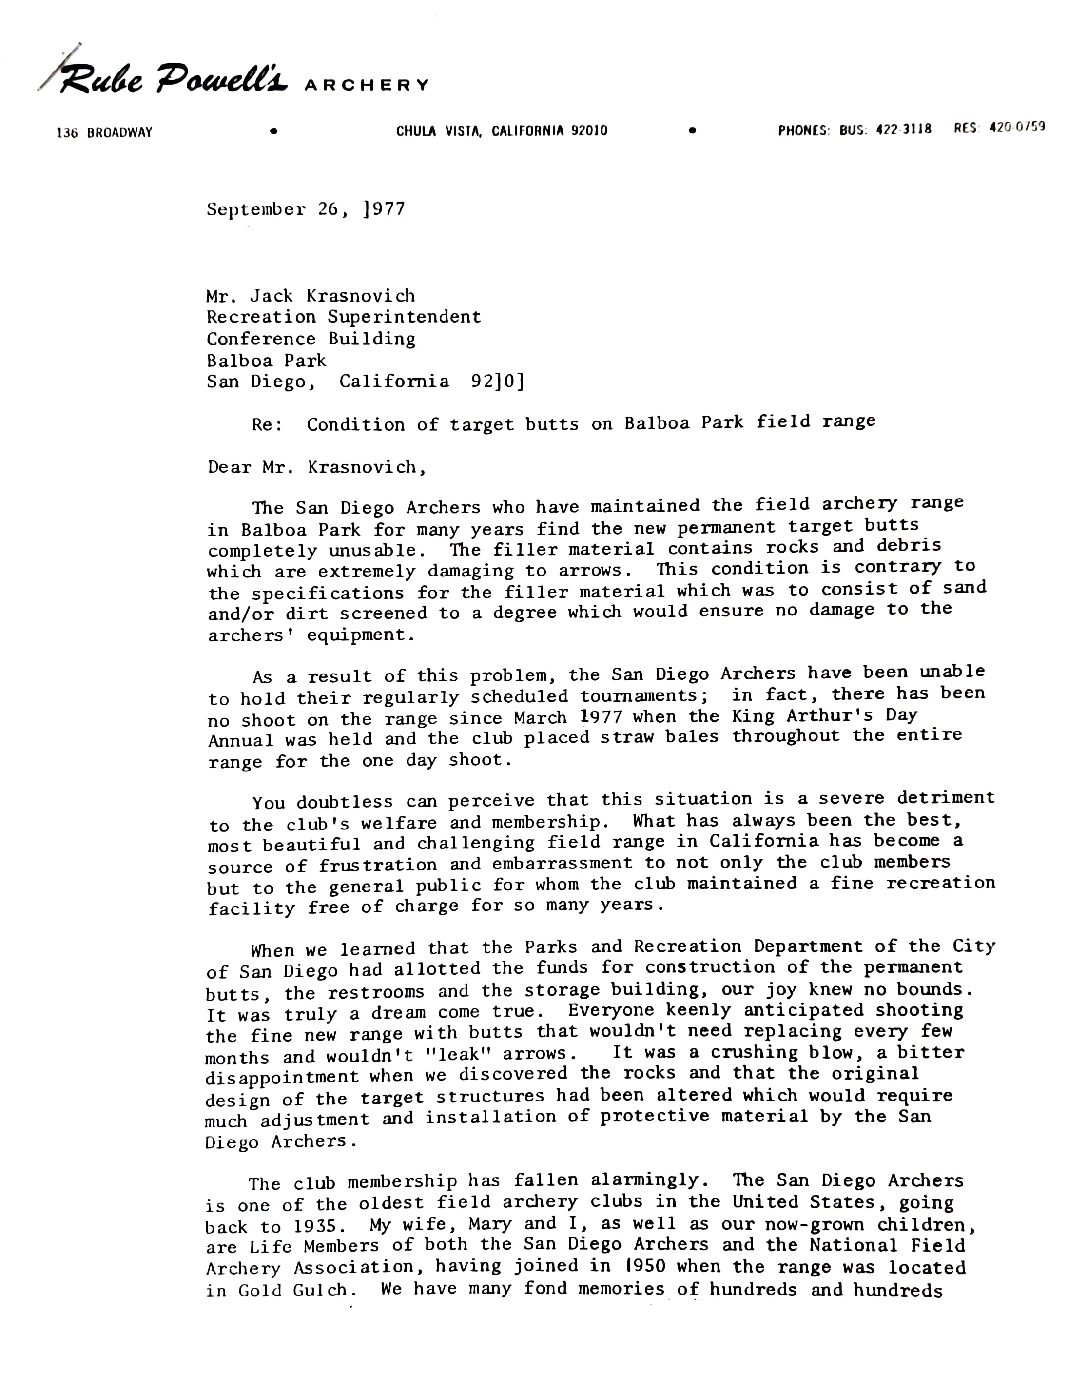 1977 Rube Powell letter